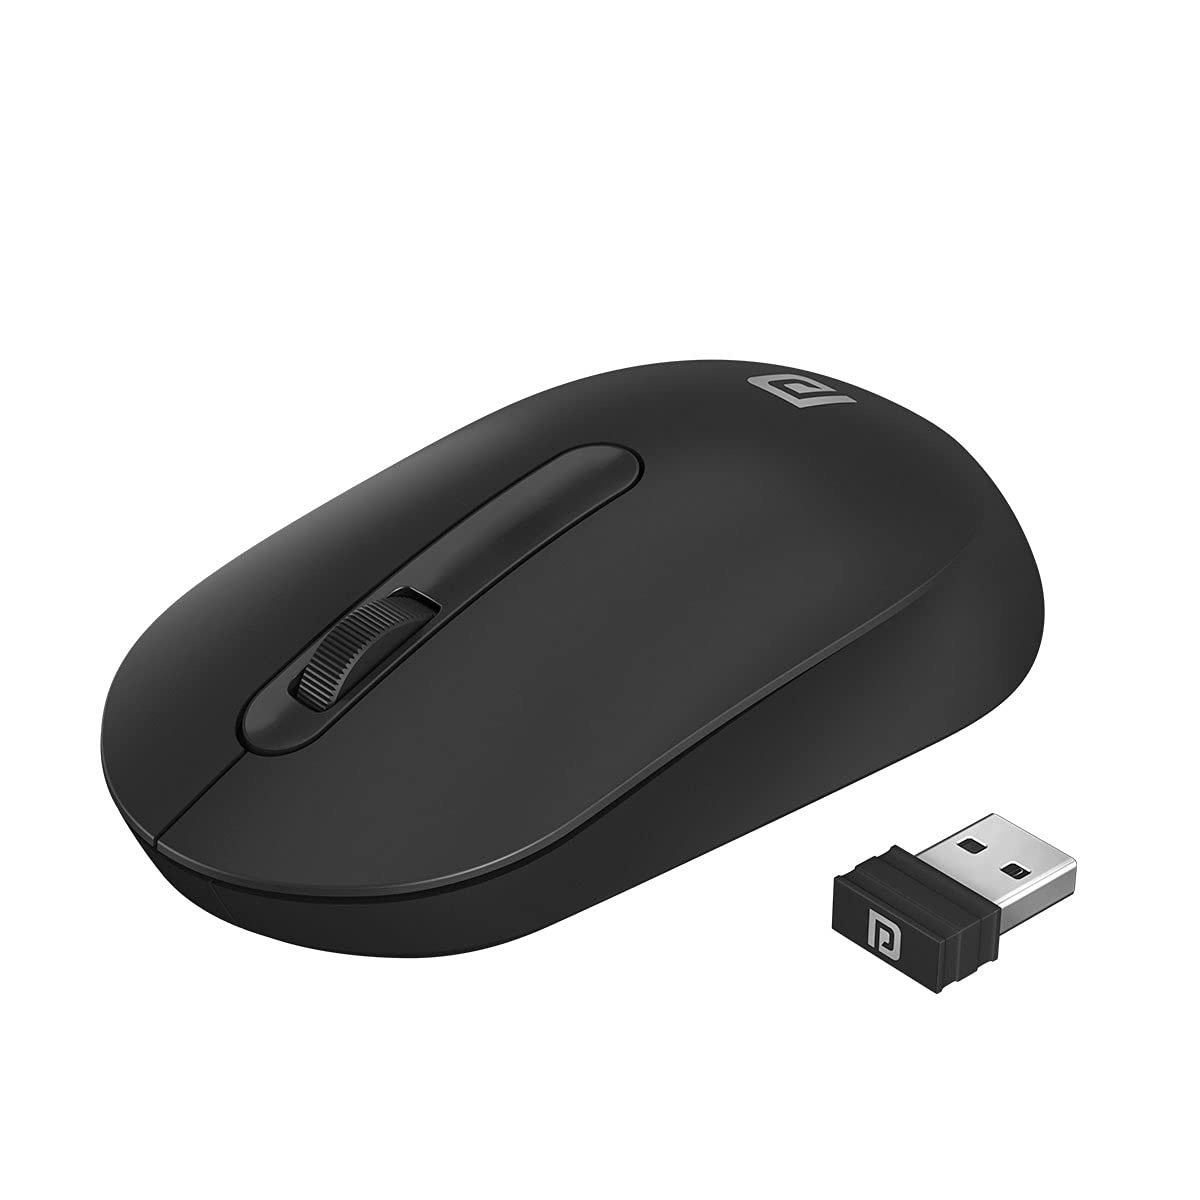 Lost Dongle? Solutions For Recovering And Replacing A Mouse Dongle